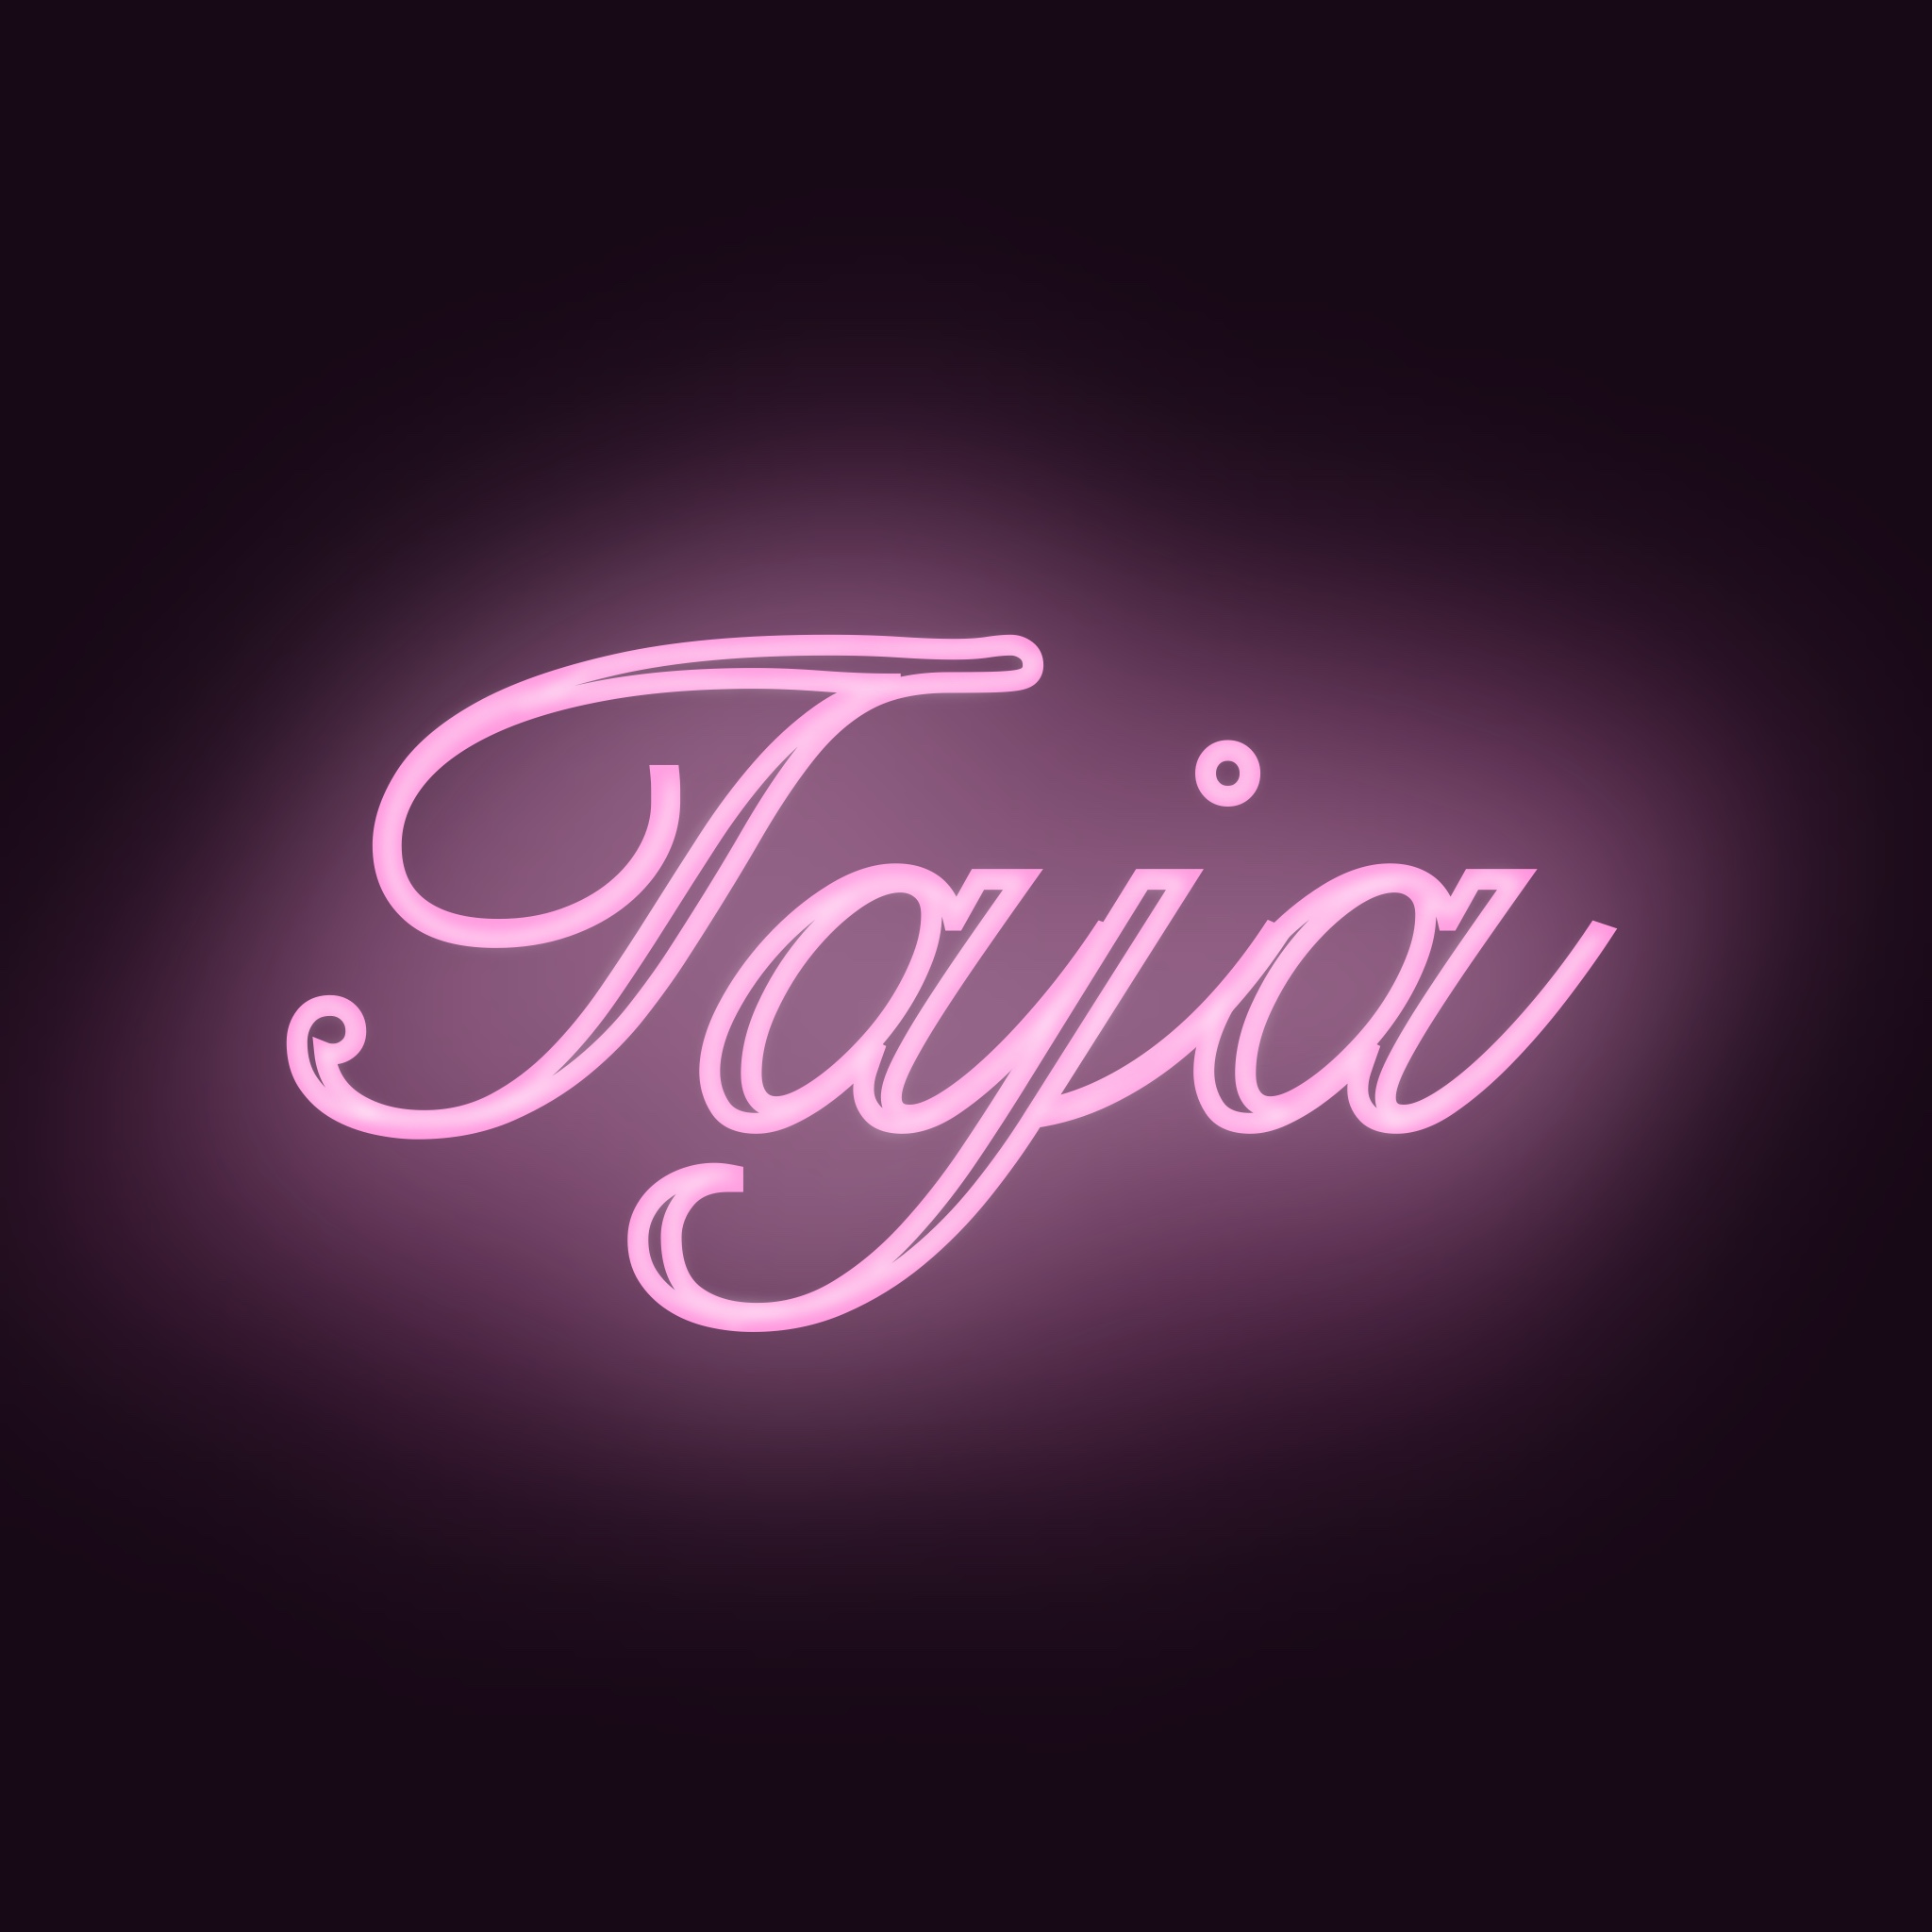 My name in glowing text.